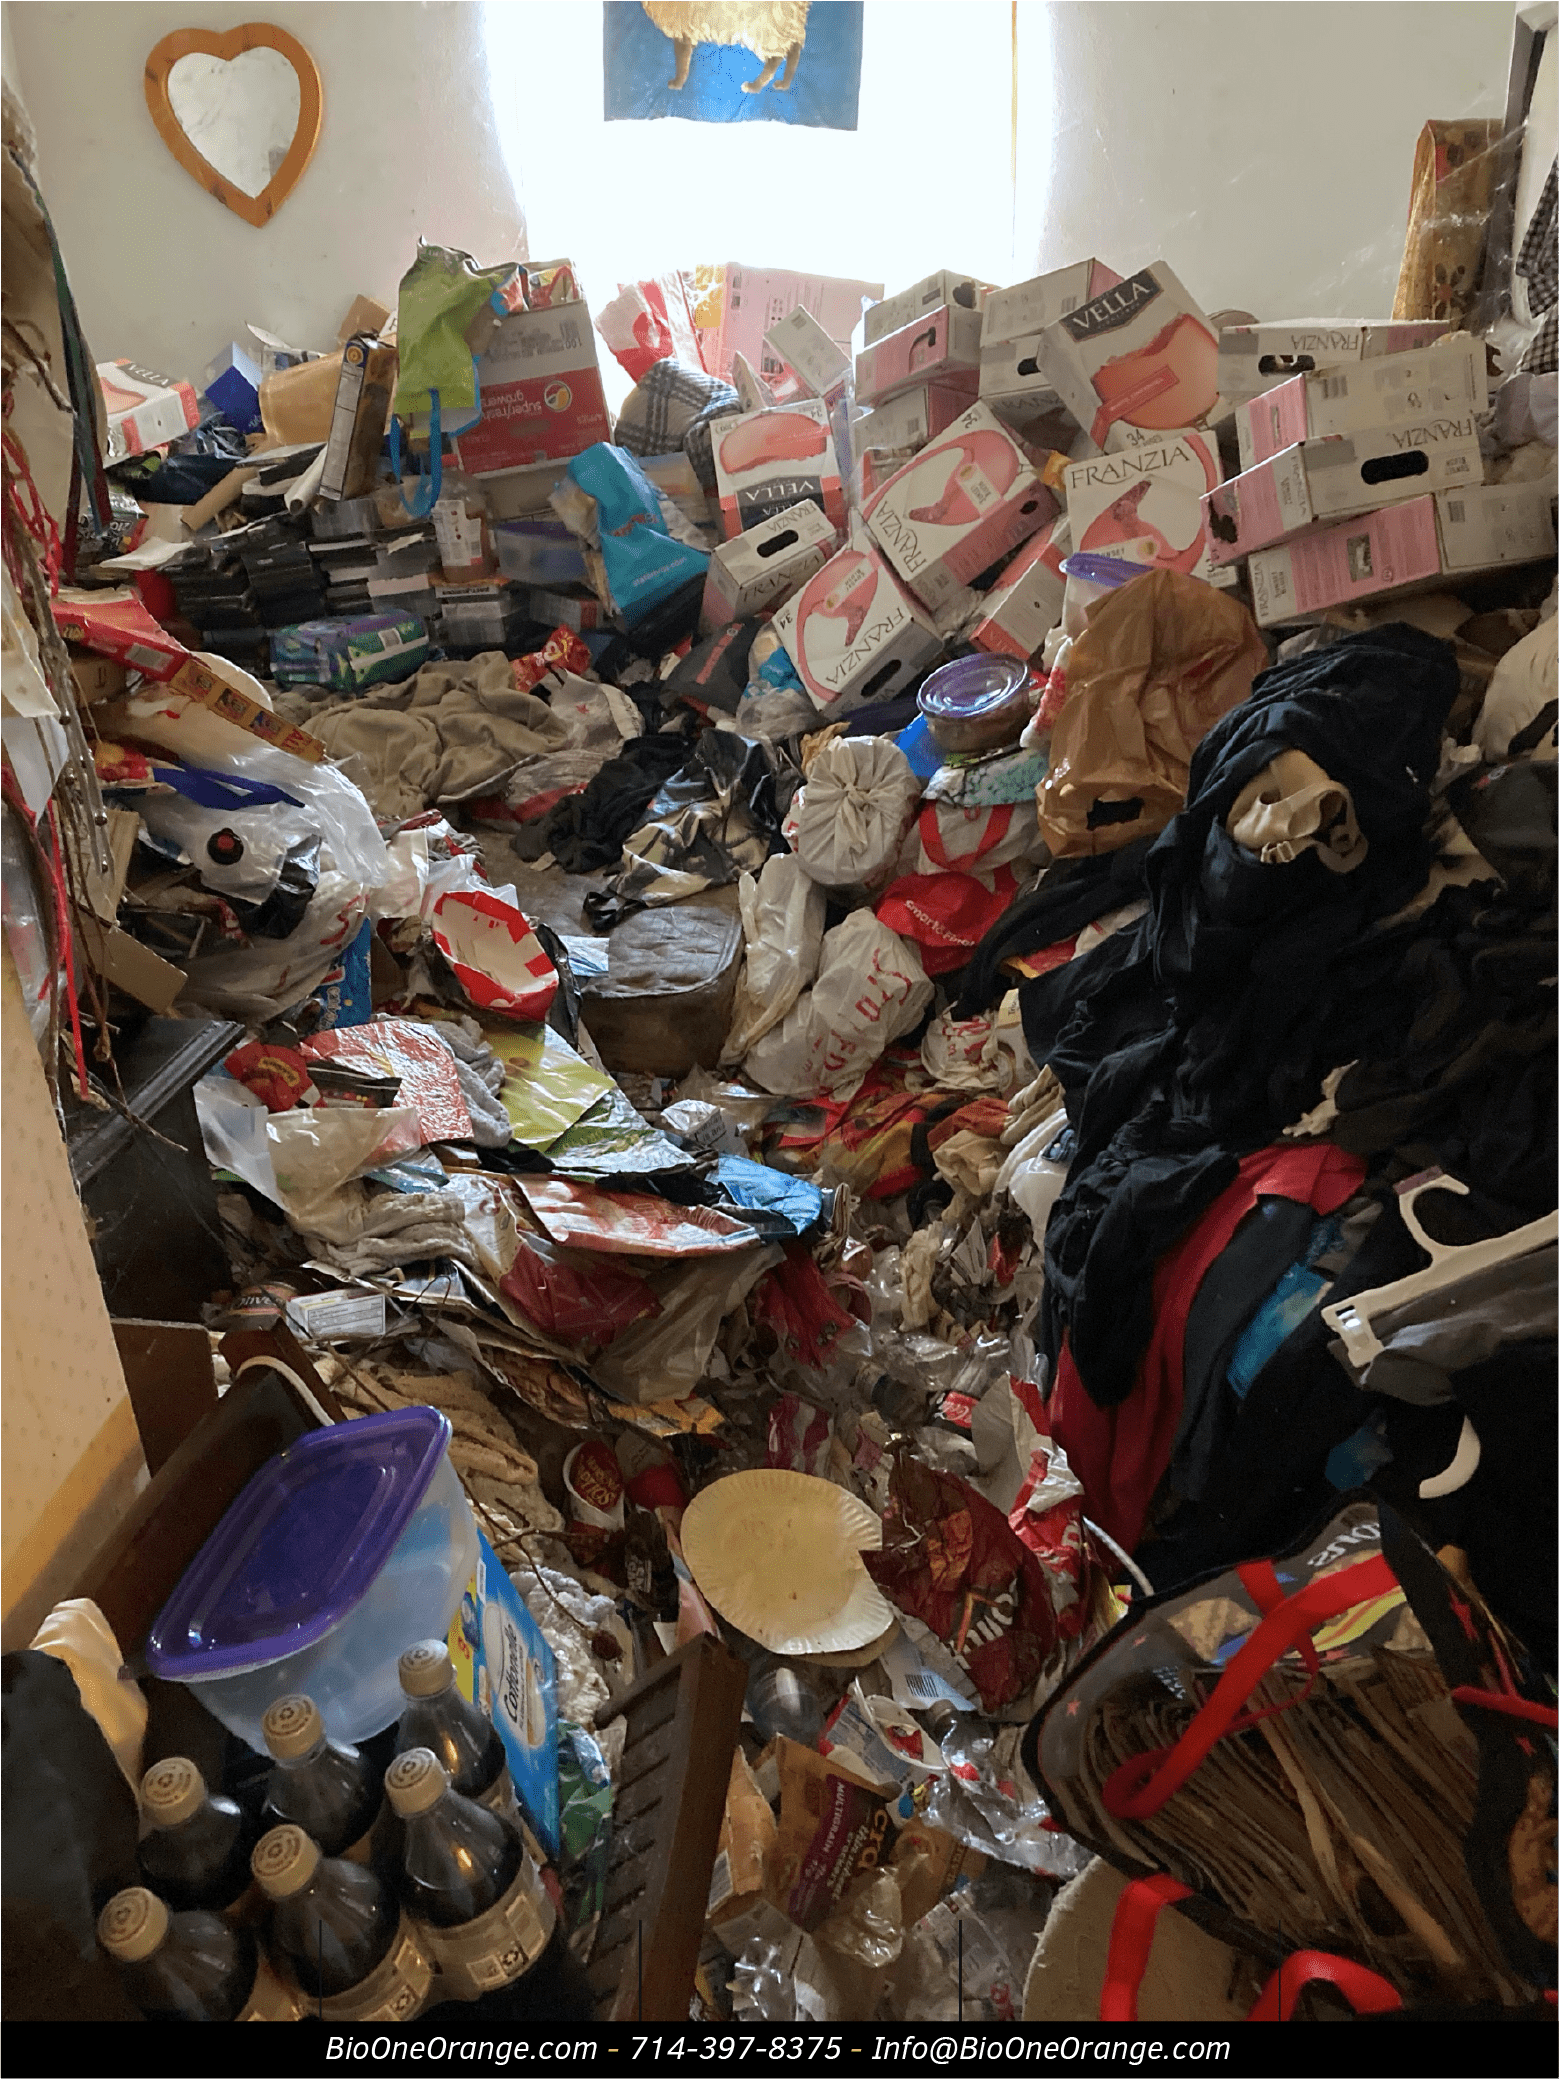 Image shows living room space with piles of waste and debris.